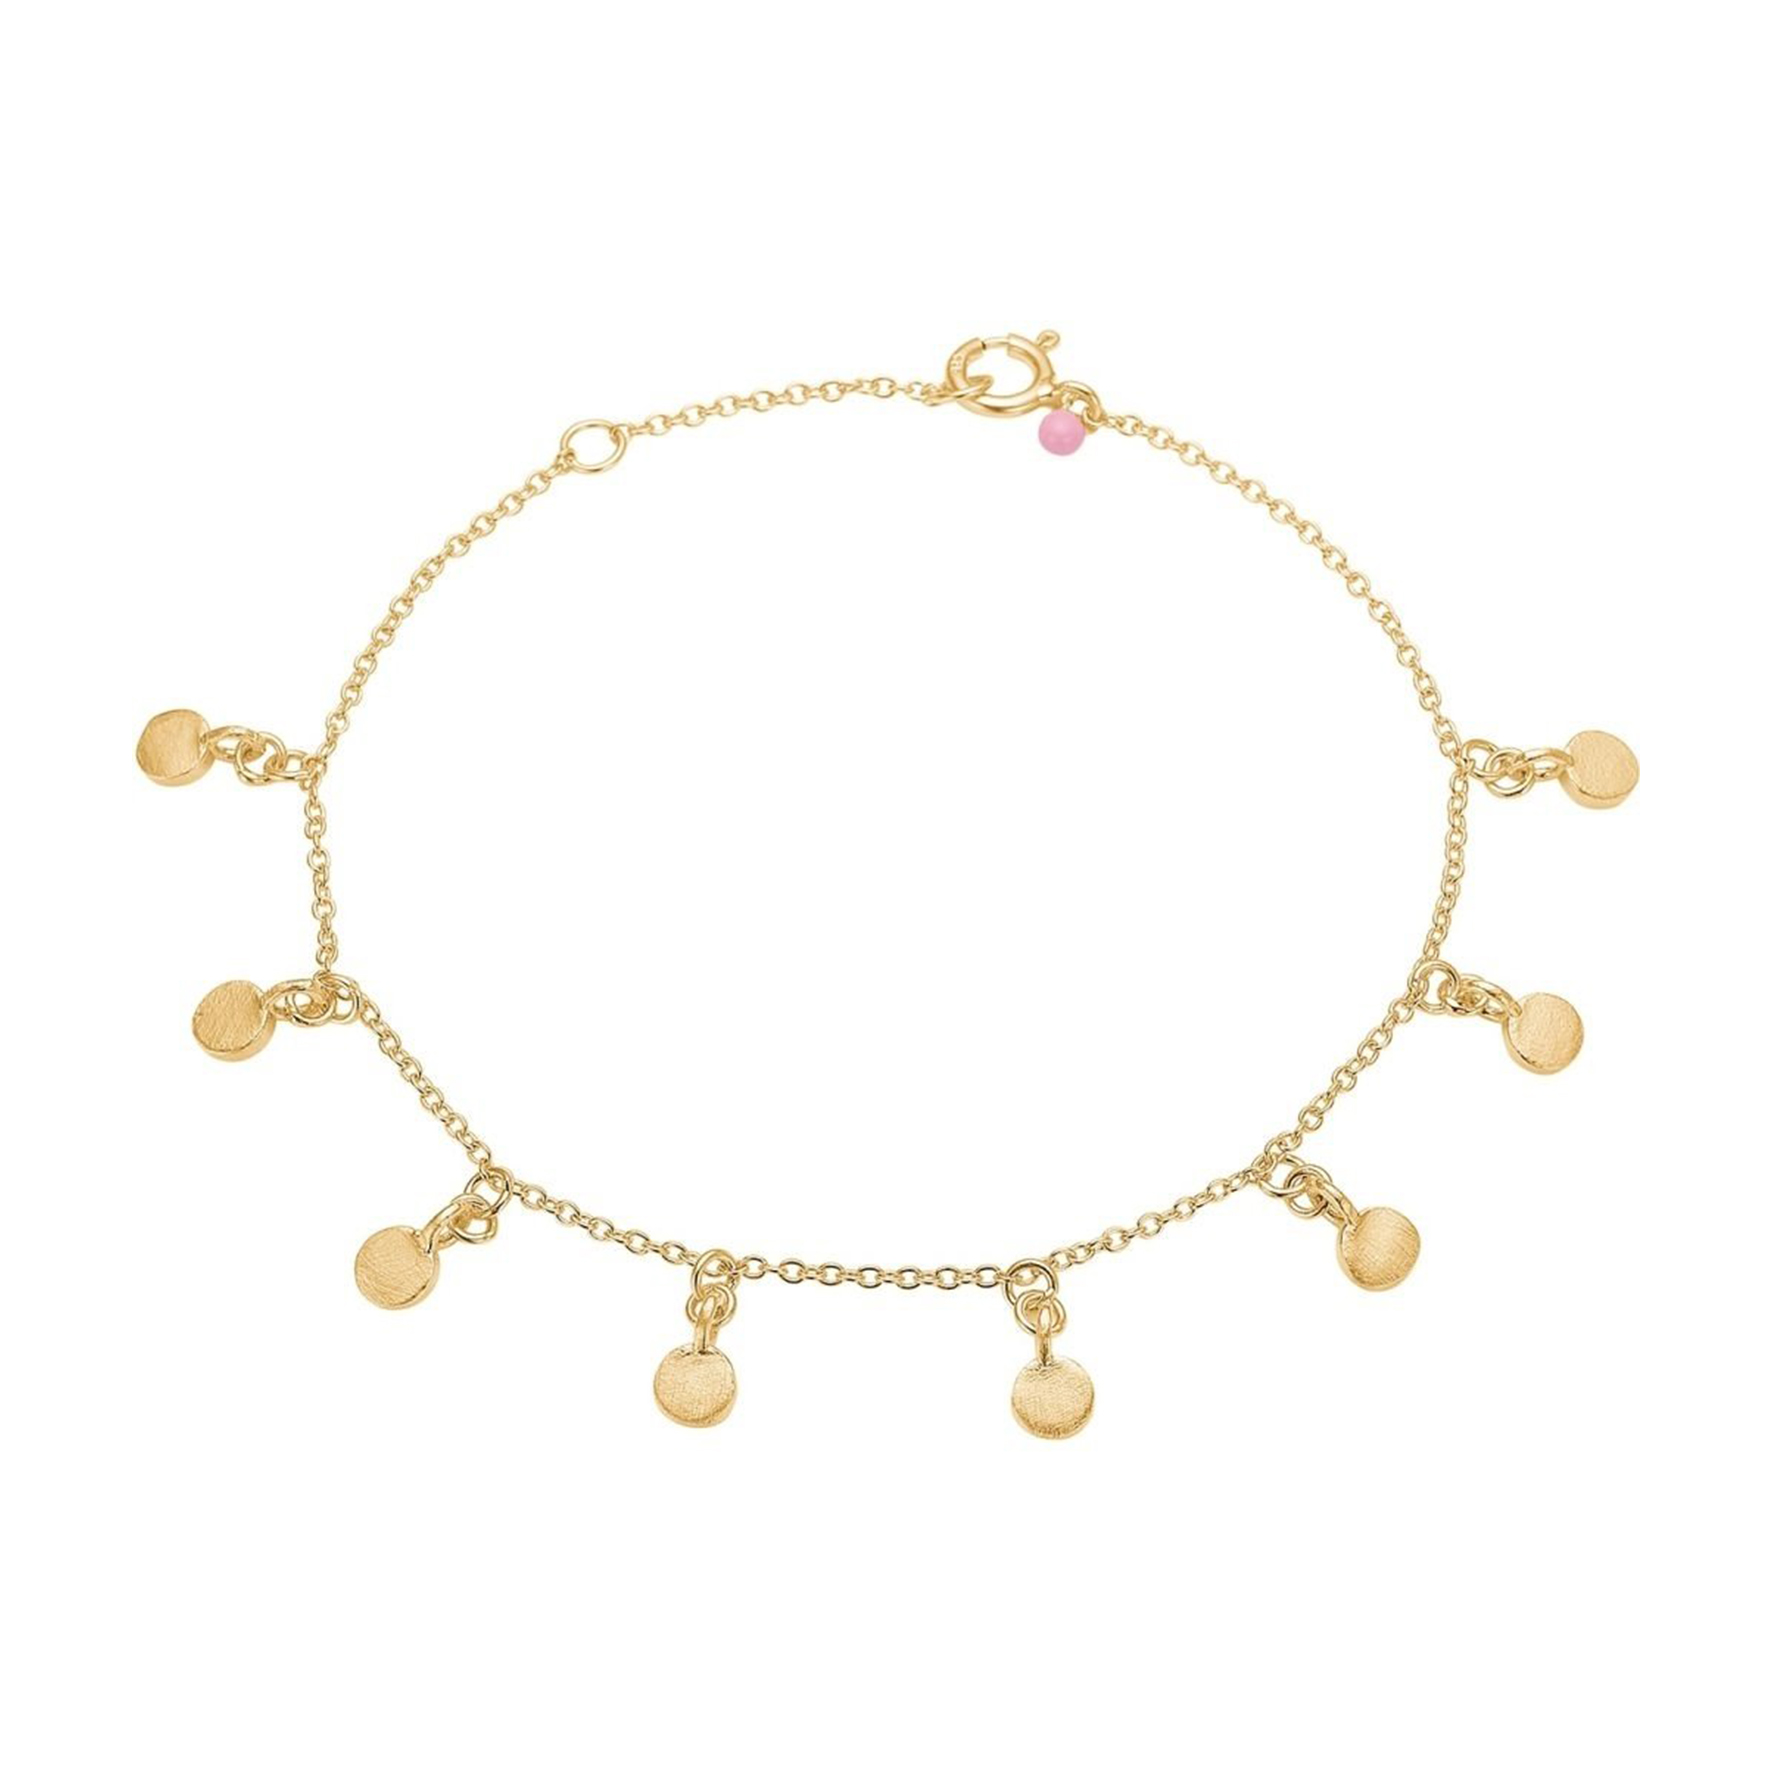 5'' with 1'' Extender Details about   Gold Finish Blue Enamel Bar with White Flowers Bracelet